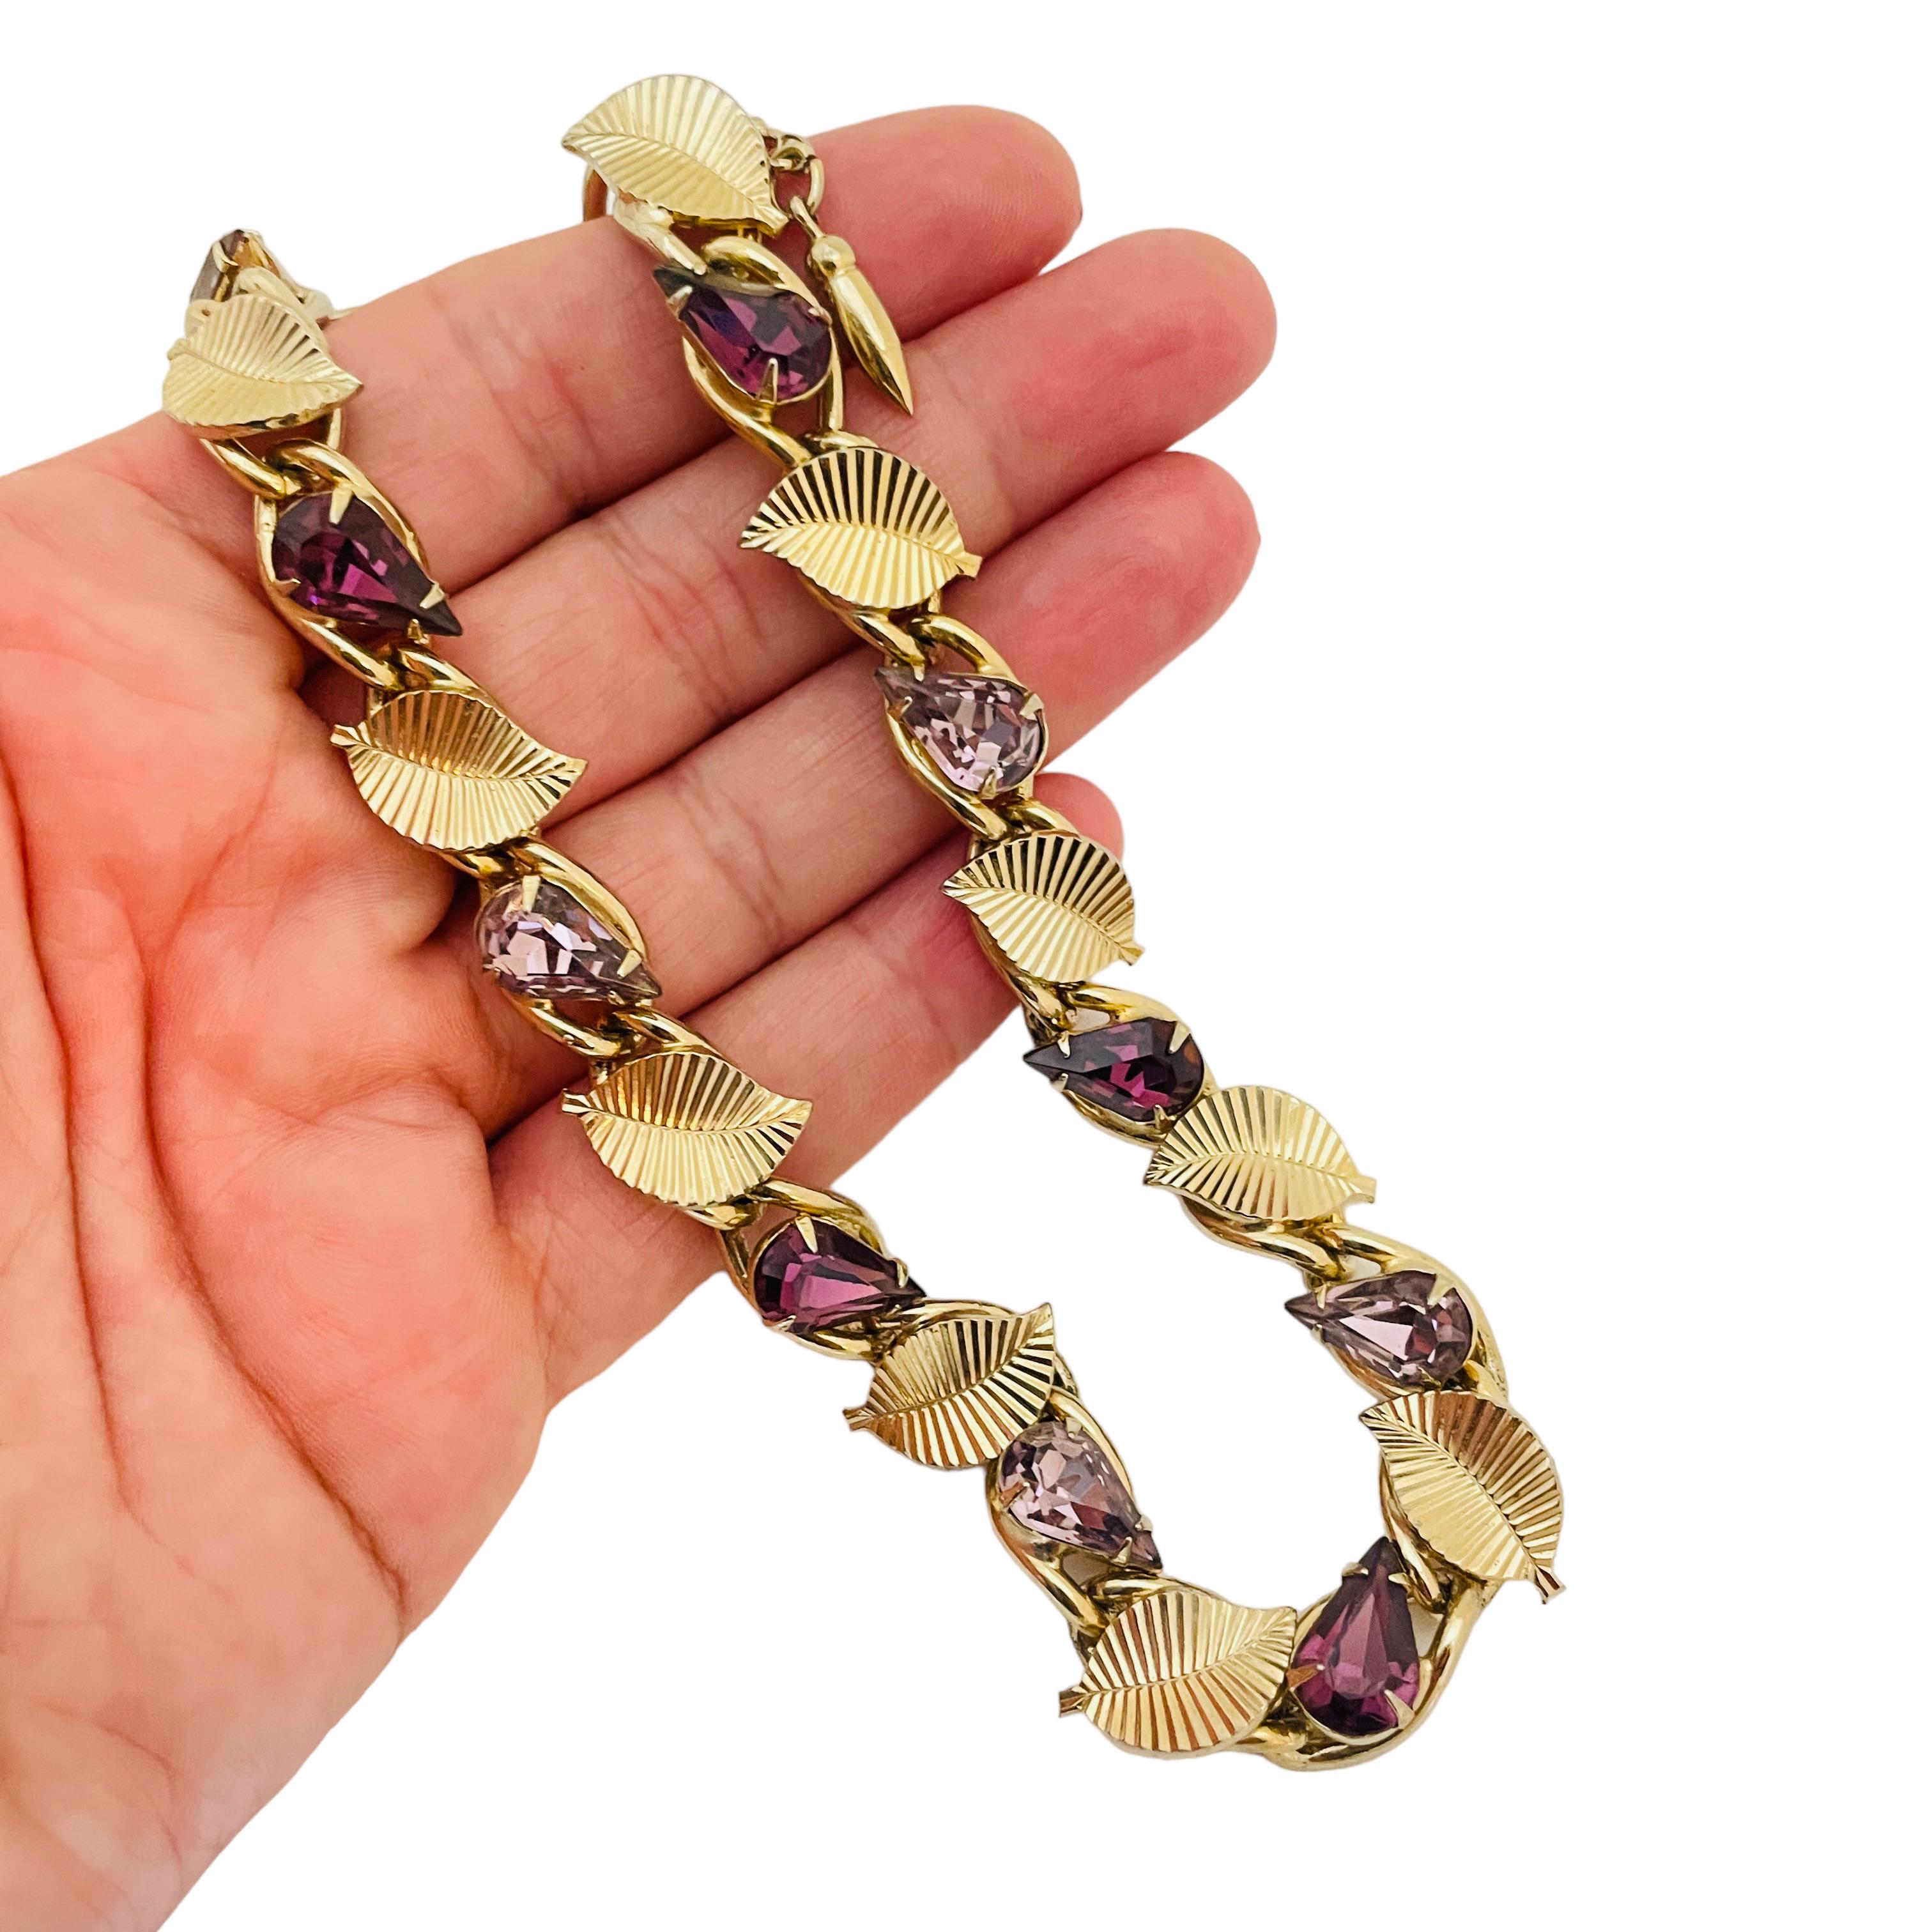 Vintage gold amethyst glass leaf necklace   In Excellent Condition For Sale In Palos Hills, IL